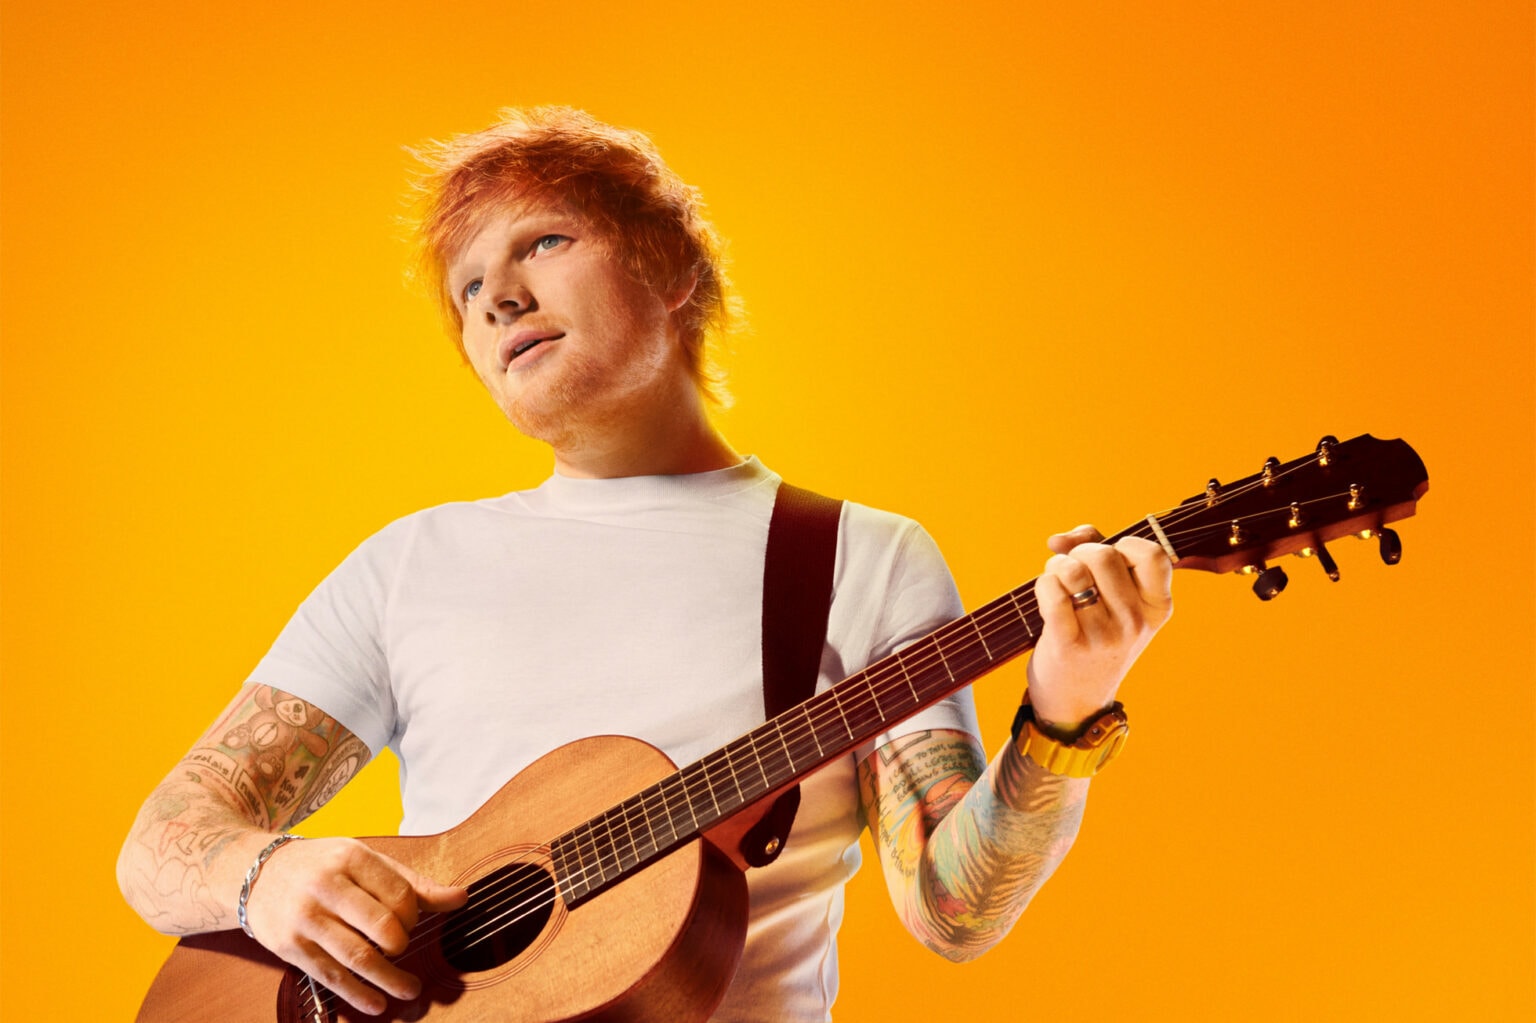 Ed Sheeran plays on Apple Music Live from London May 10.